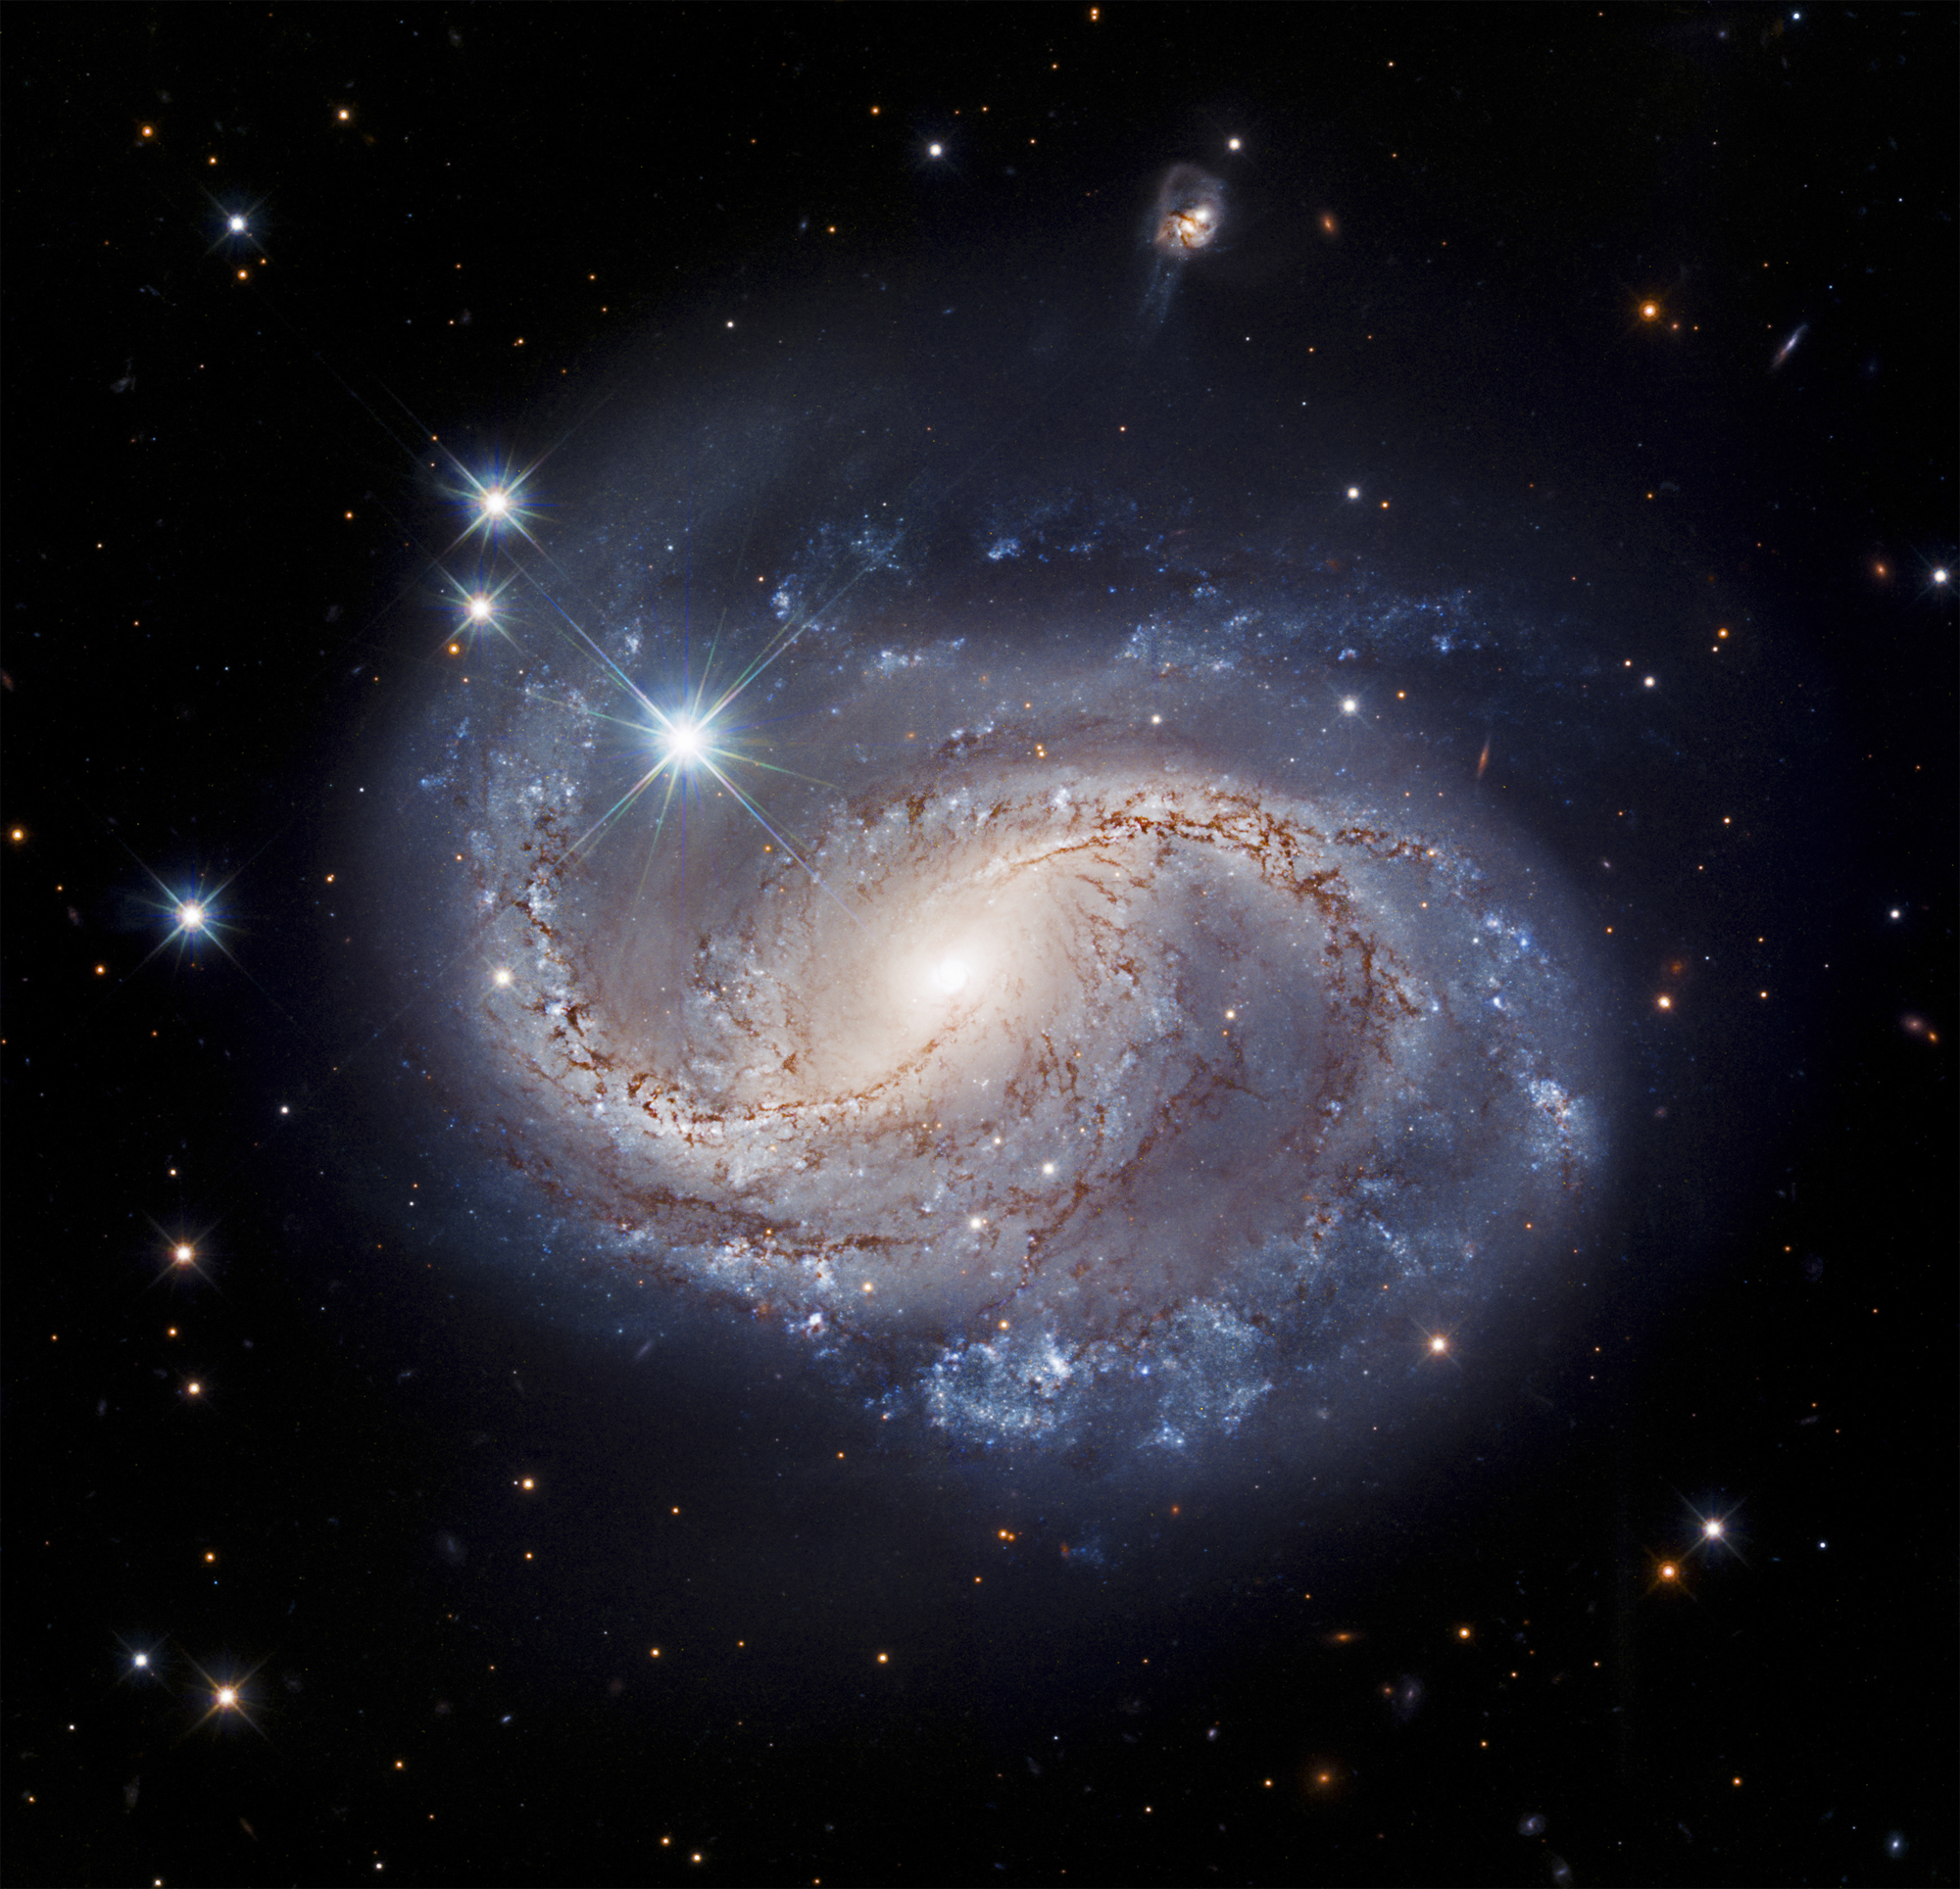 A Hubble Space Telescope image of the spiral galaxy NGC 6956.